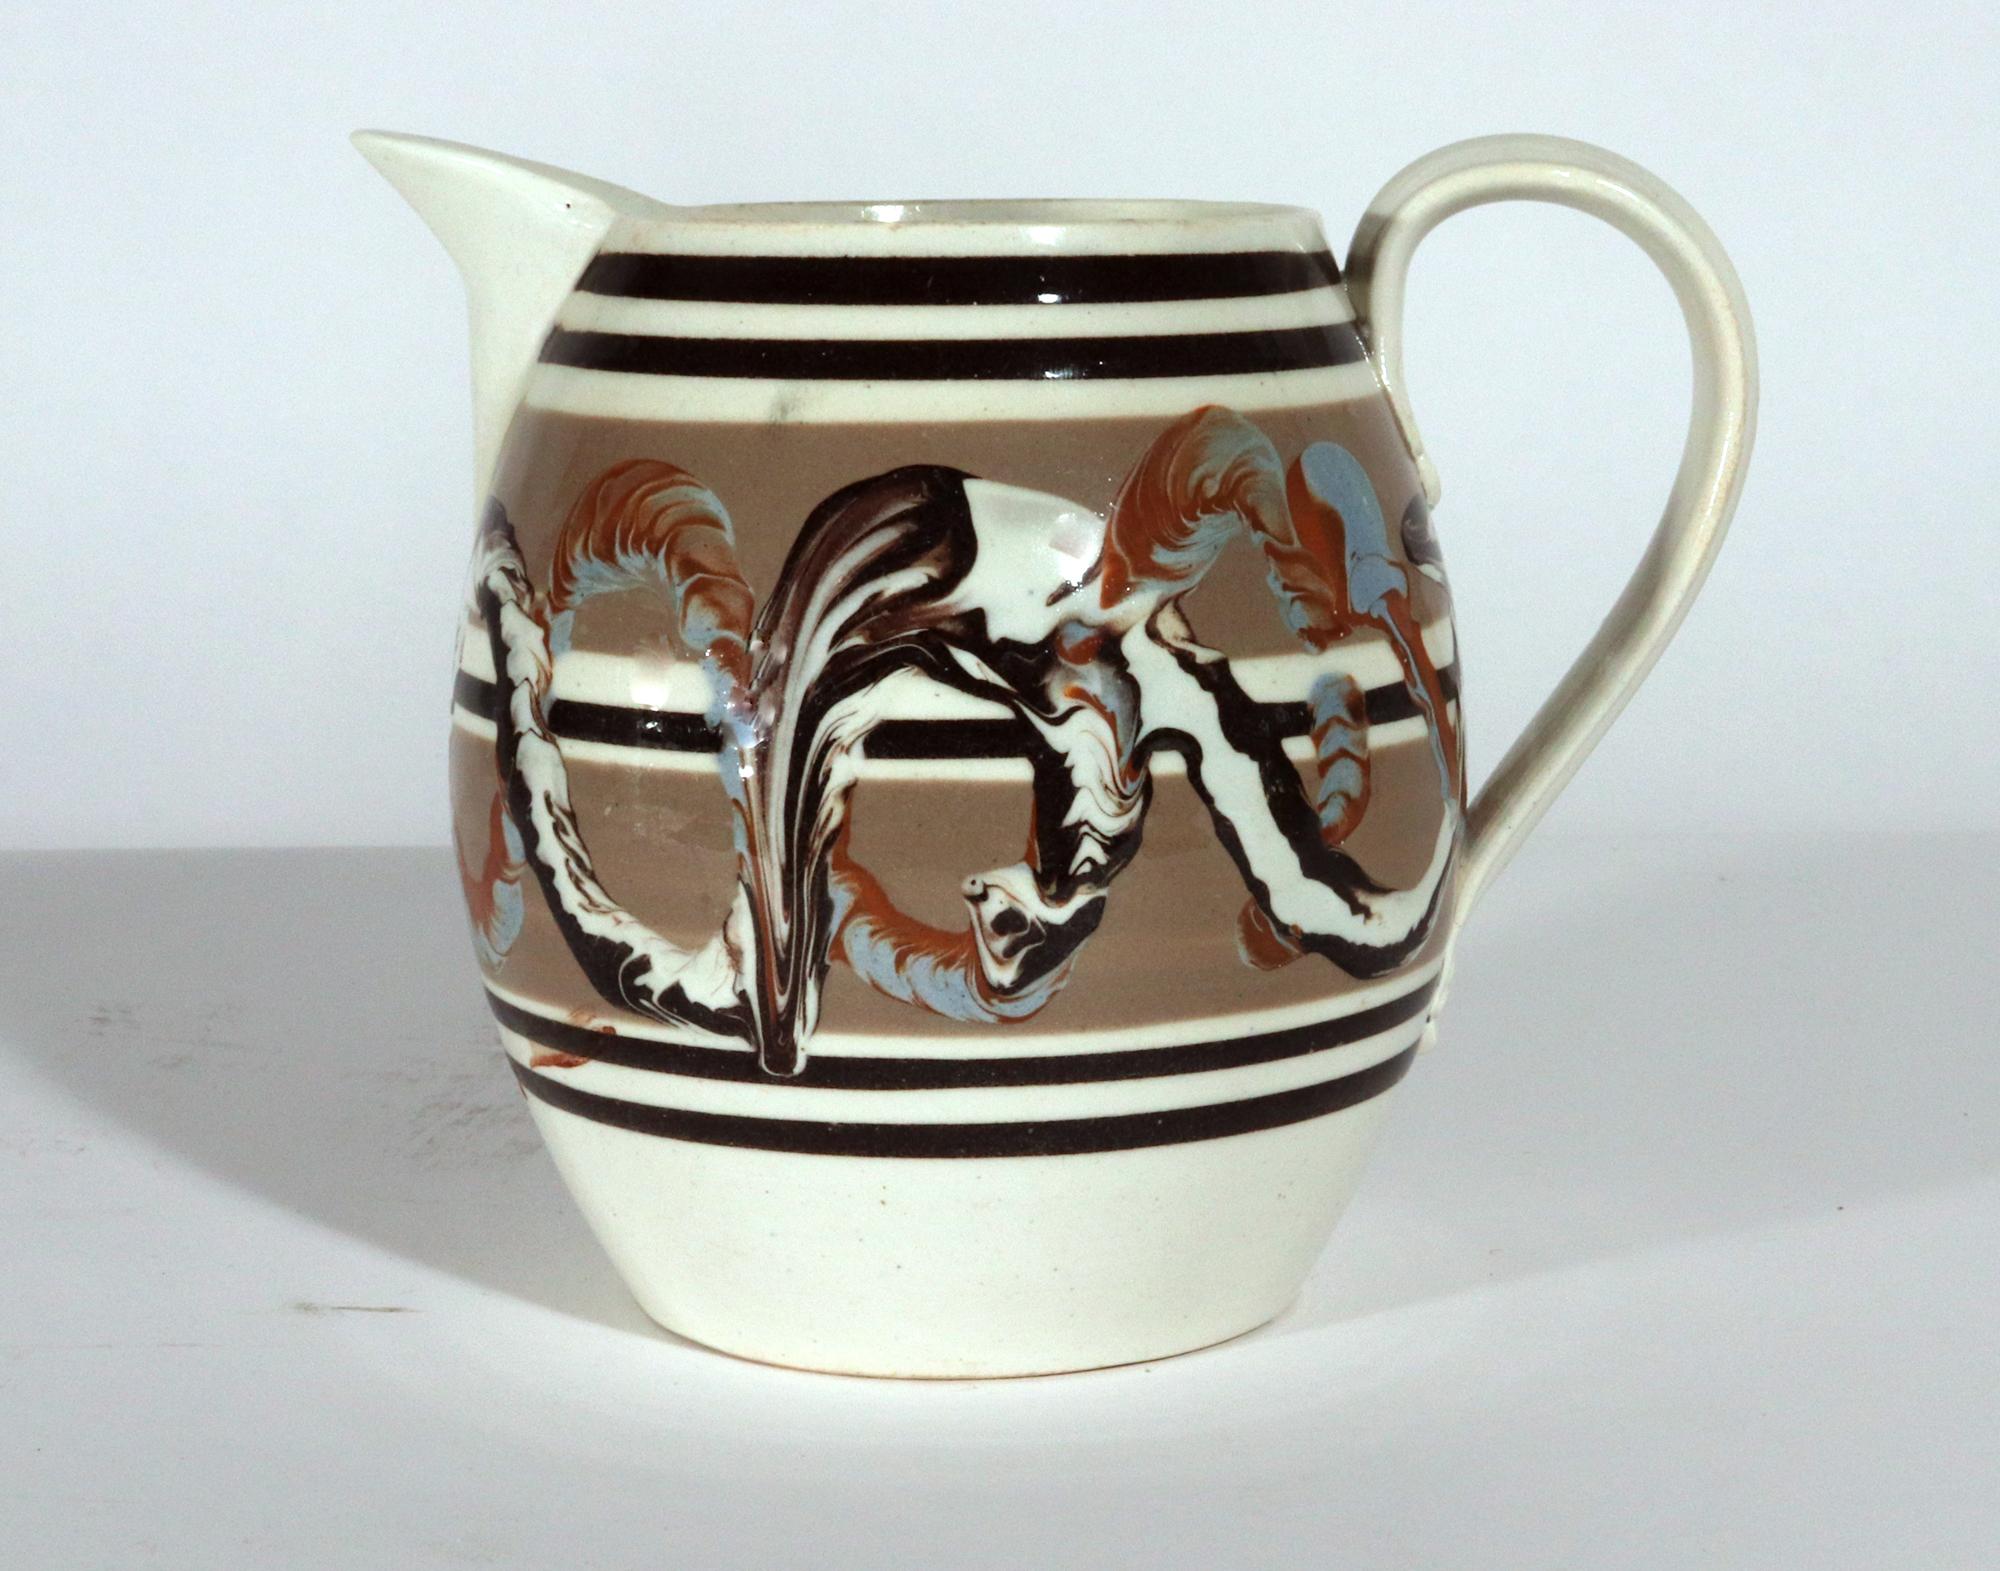 Mocha Creamware Double Earthworm Tankard,
Circa 1800

The mocha creamware jug is encircled by two different bands of the earthworm design.  One band is in an unusual red and blue and the other band is in brown and white which overlays the first